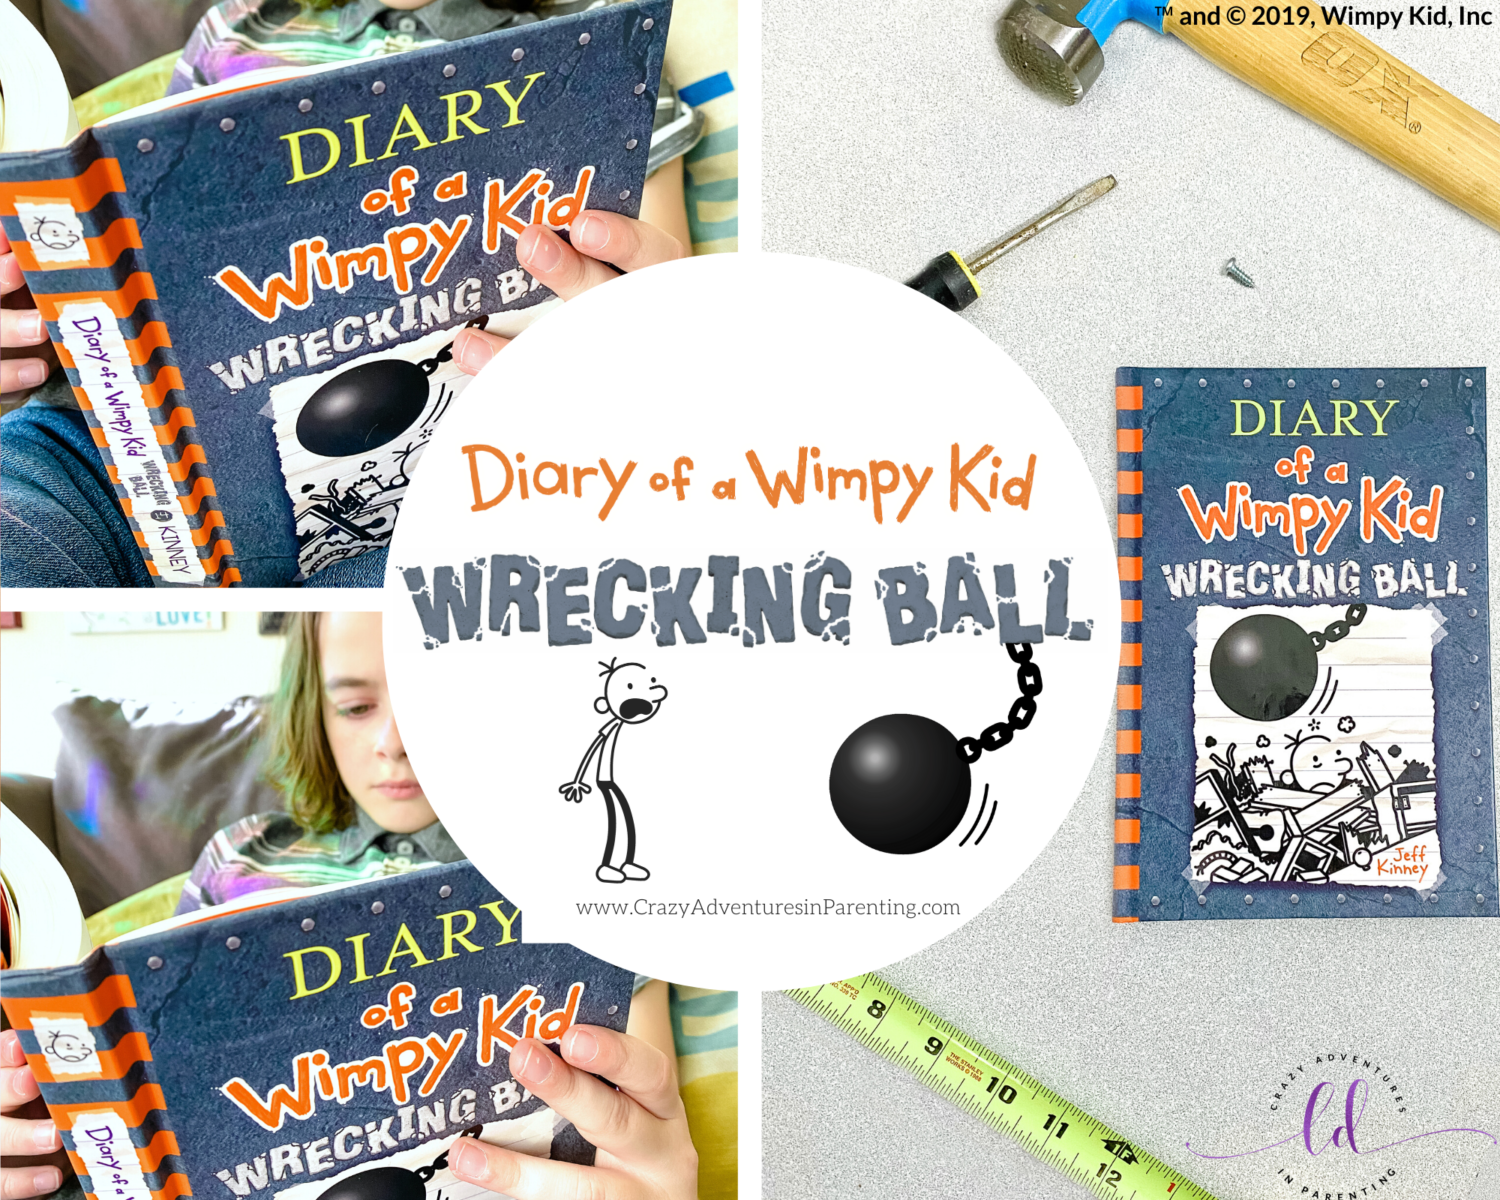 Diary of a Wimpy Kid: Wrecking Ball Available Now